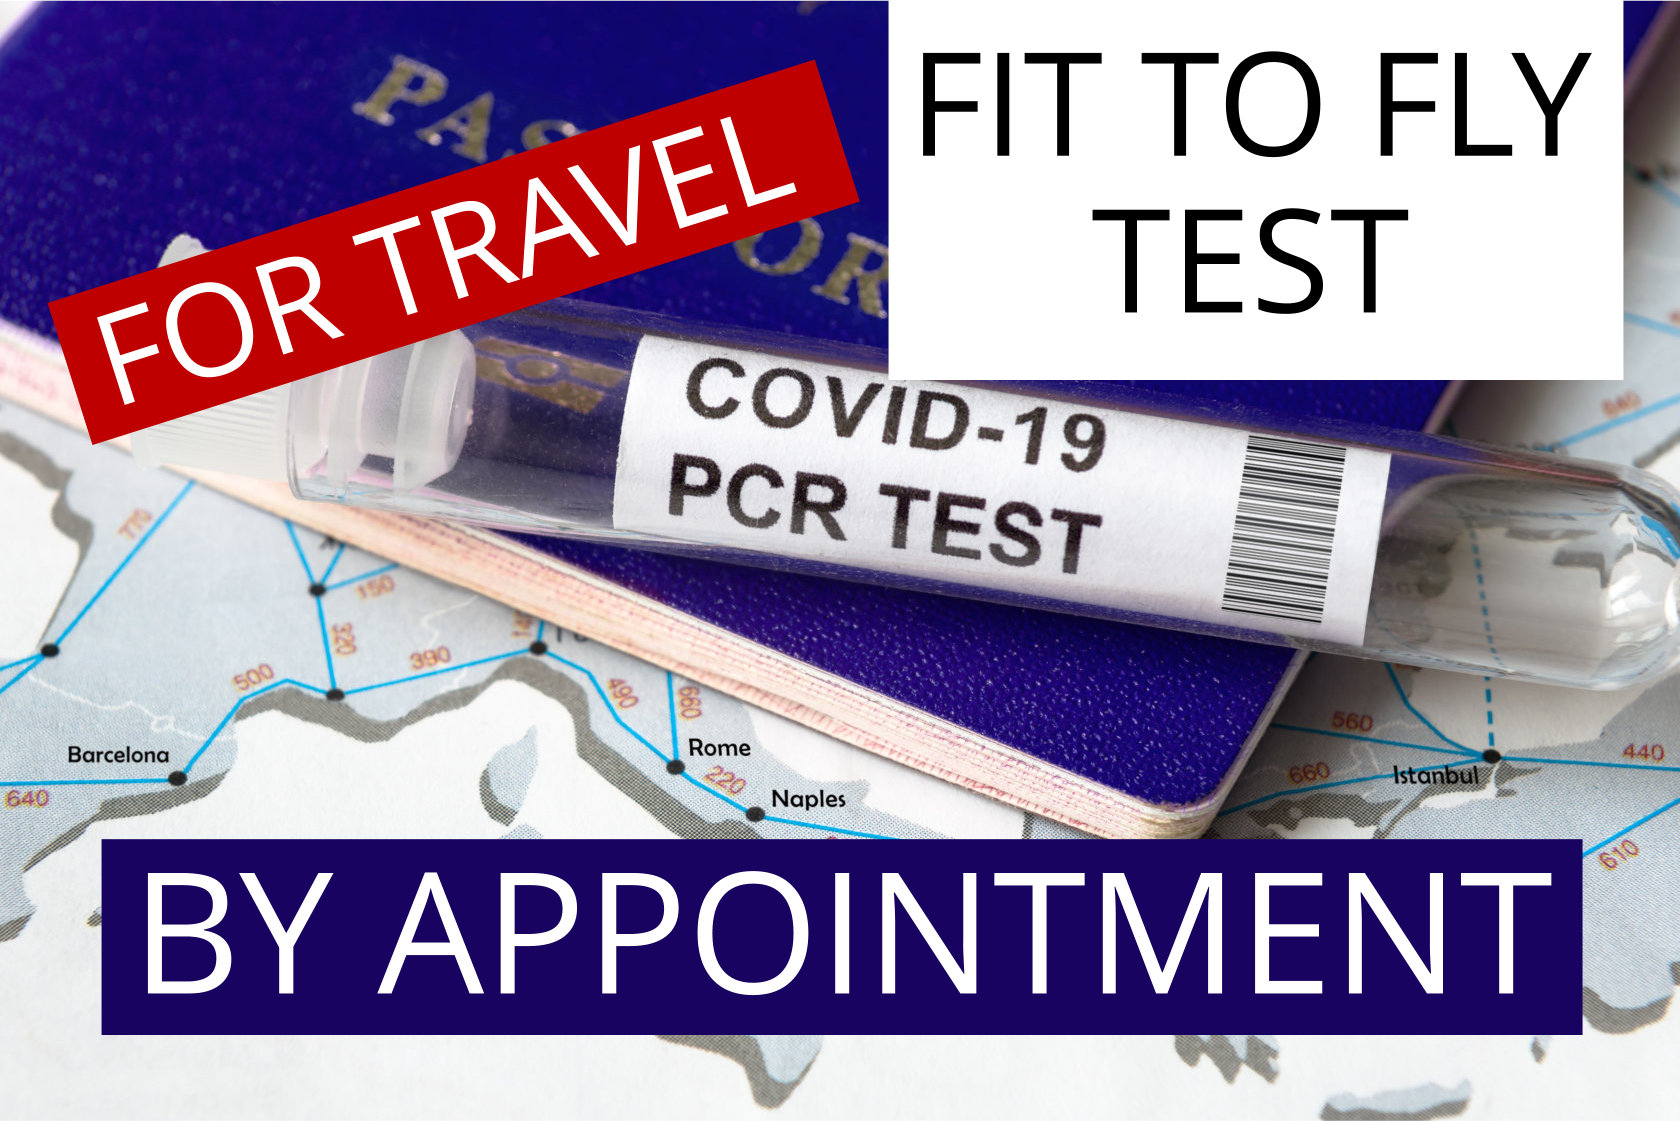 Fit To Fly Test & Certificate - Covid-19 PCR